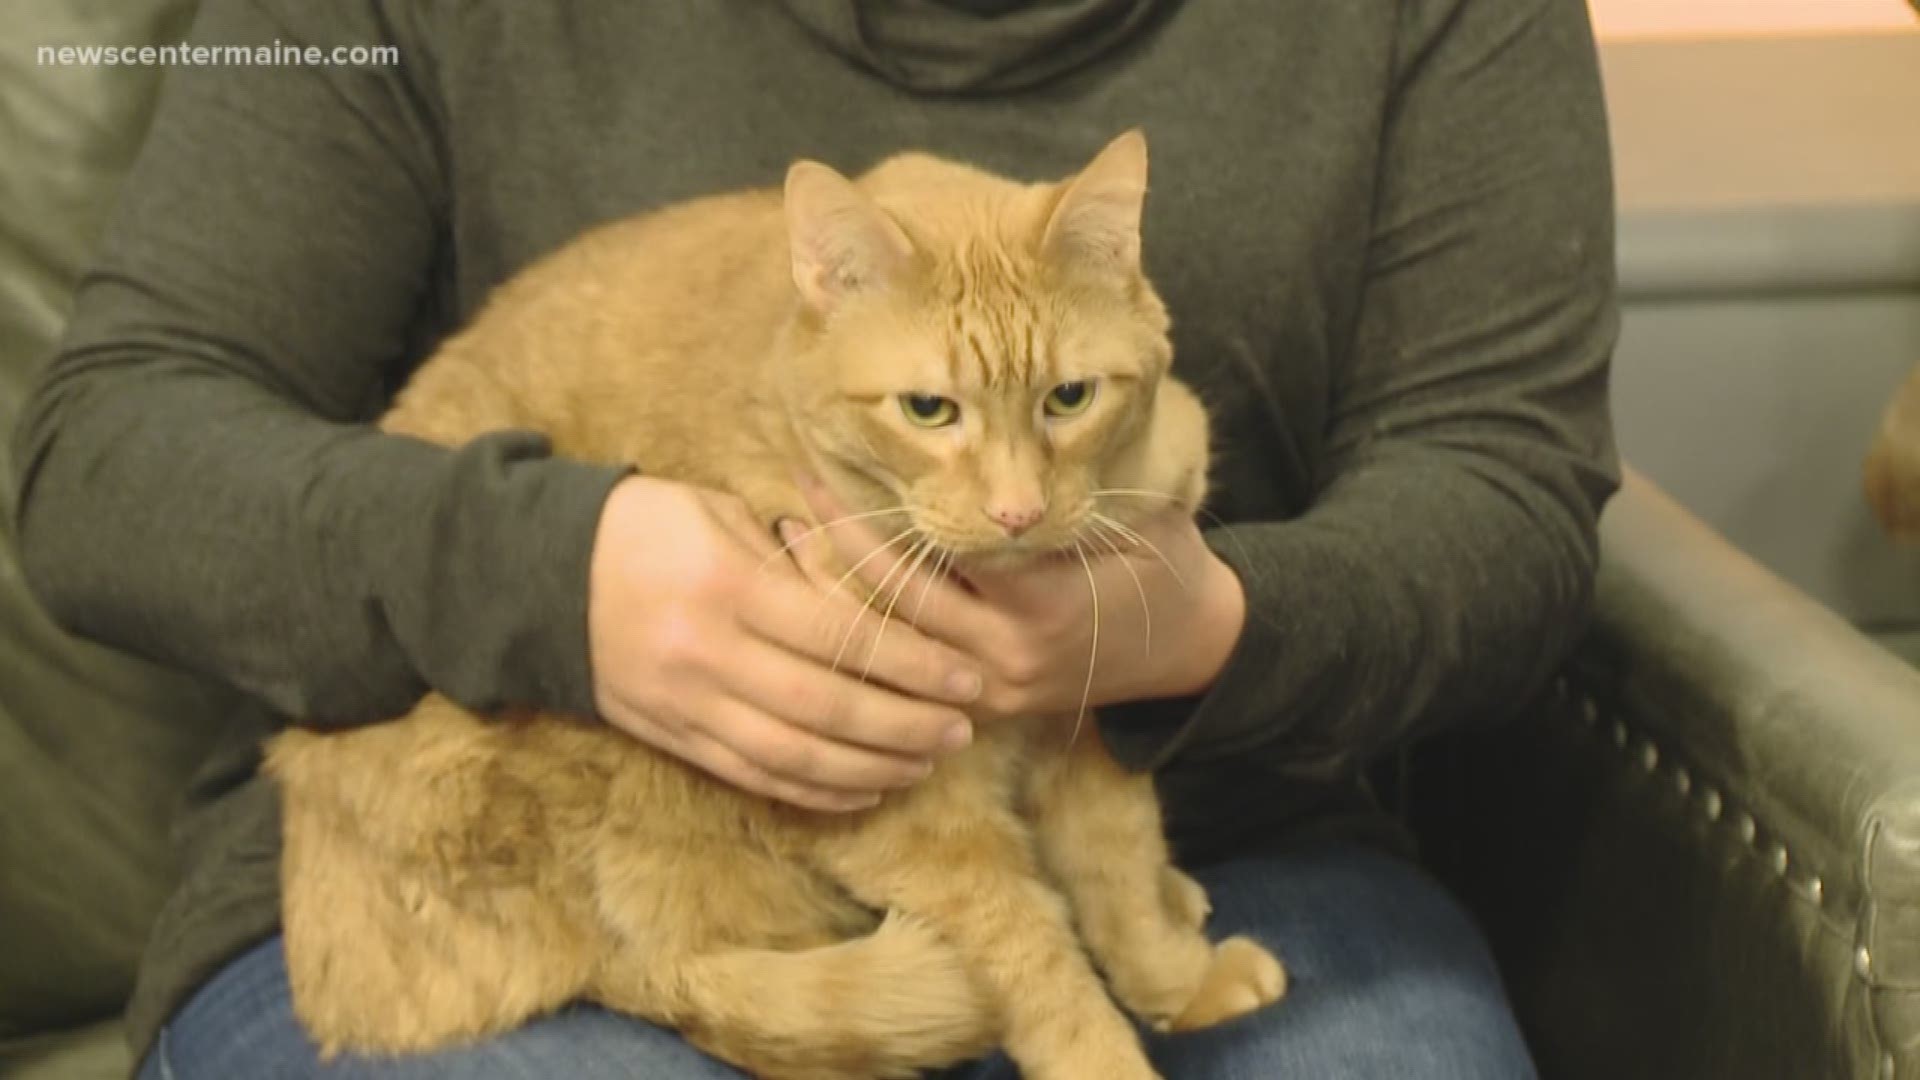 Opie the 11 year old diabetic cat is in need of a home. He's available through the Animal Refuge League of Greater Portland.